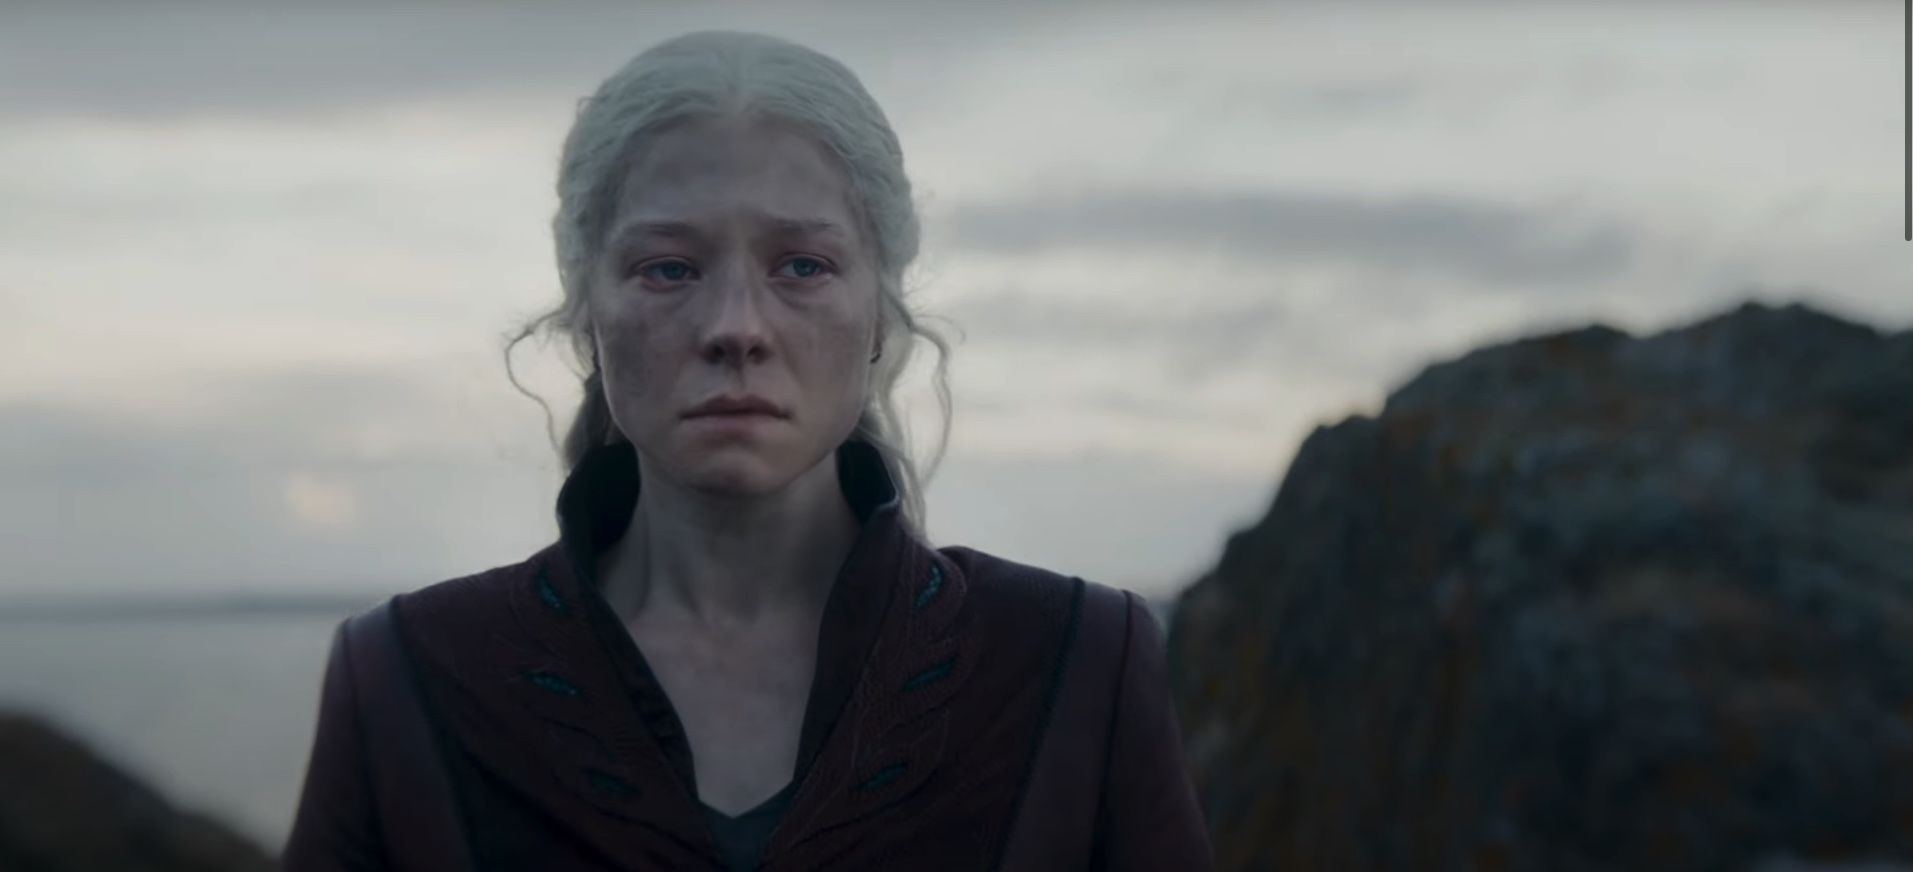 George RR Martin Says 'House of the Dragon' Has 'Very Dark' Episodes - And They'll Make Us Cry